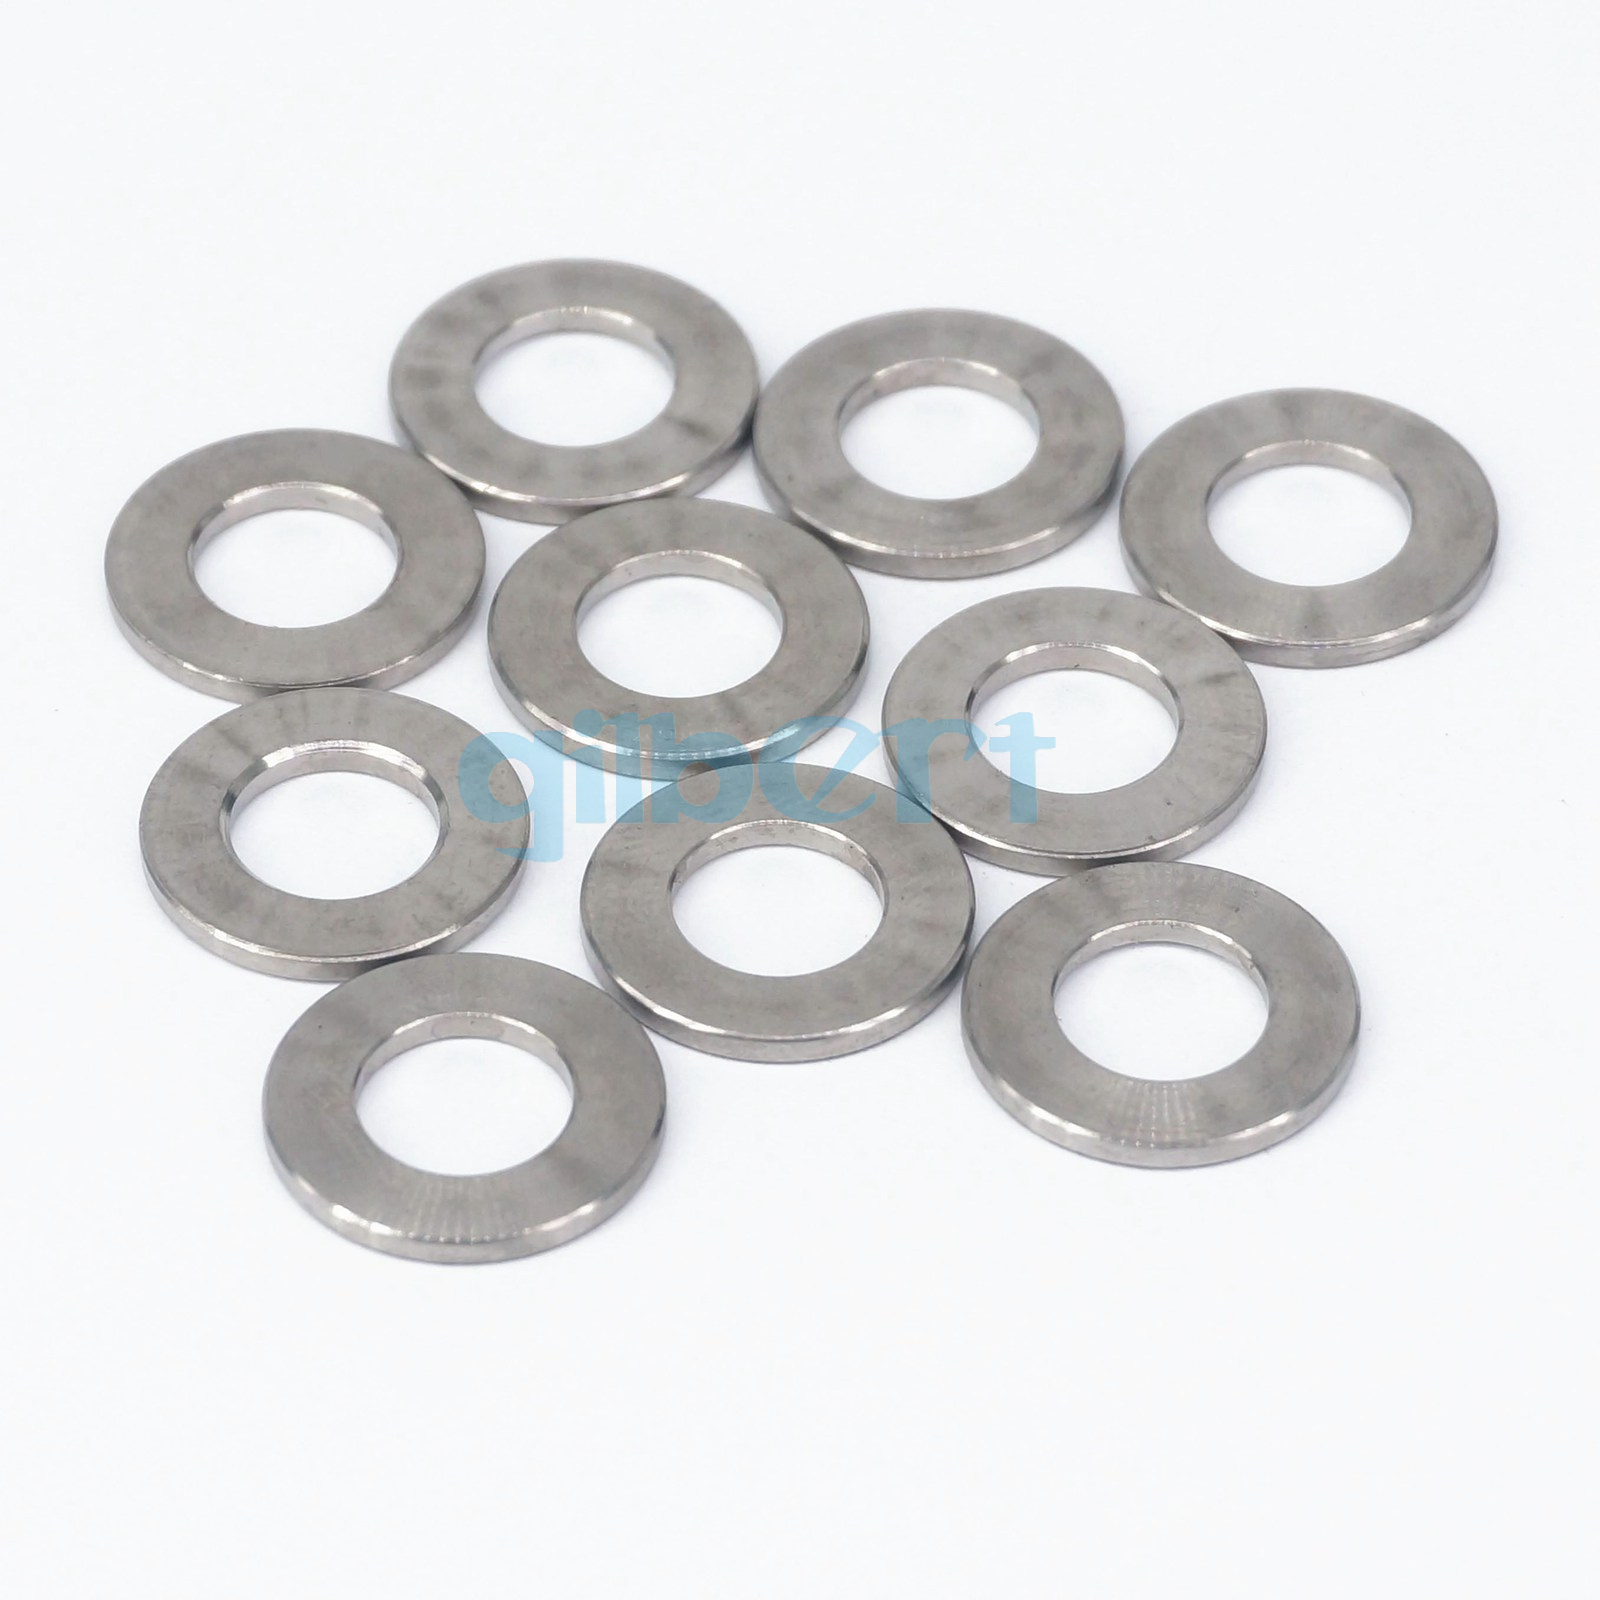 Titanium M5 M6 M8 Washer Bolt Washer for HEX Socket Tapered Screw GR5 